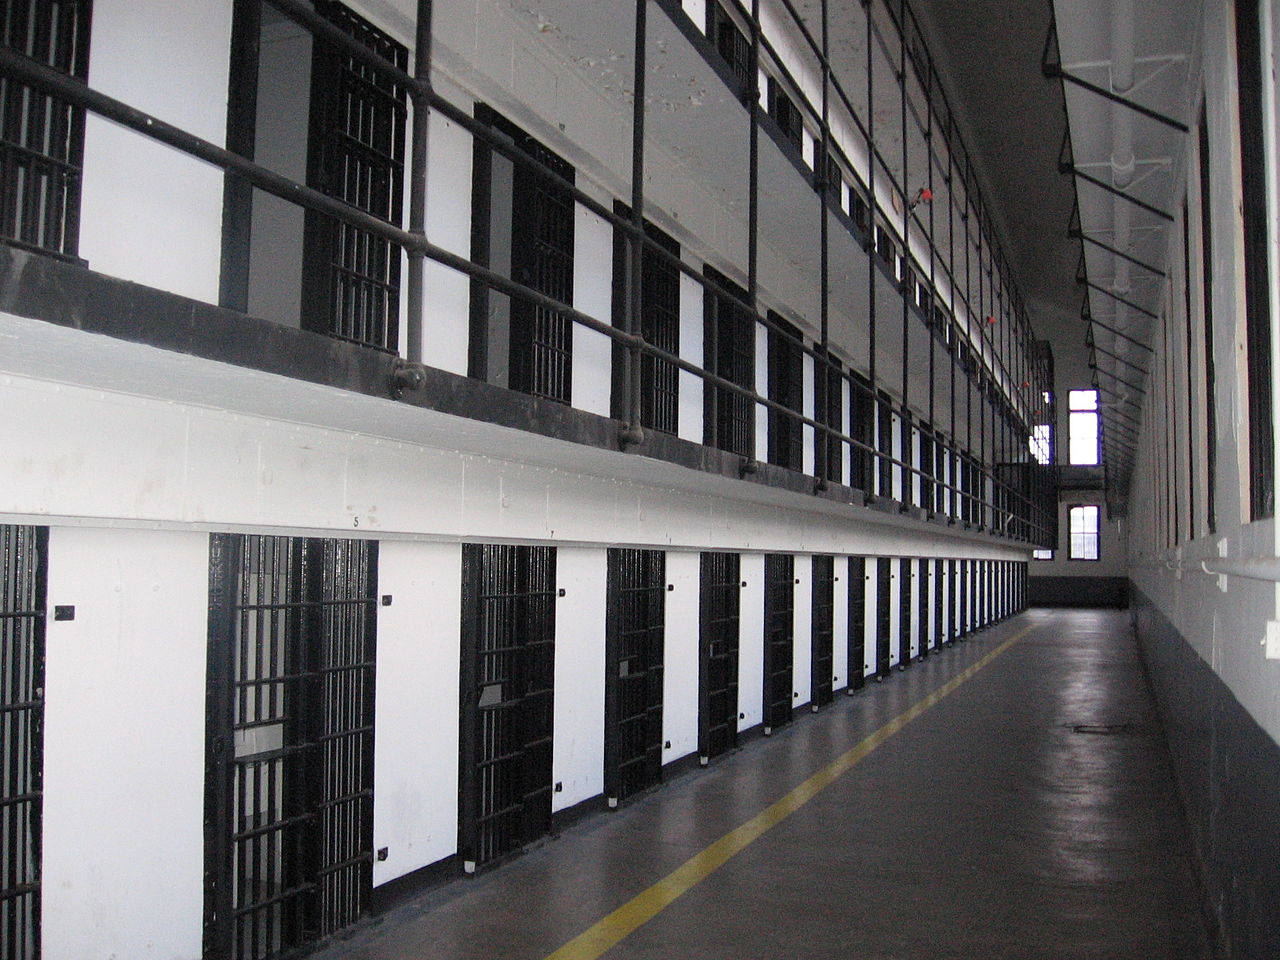 The main cell block has 400 inmate cells.